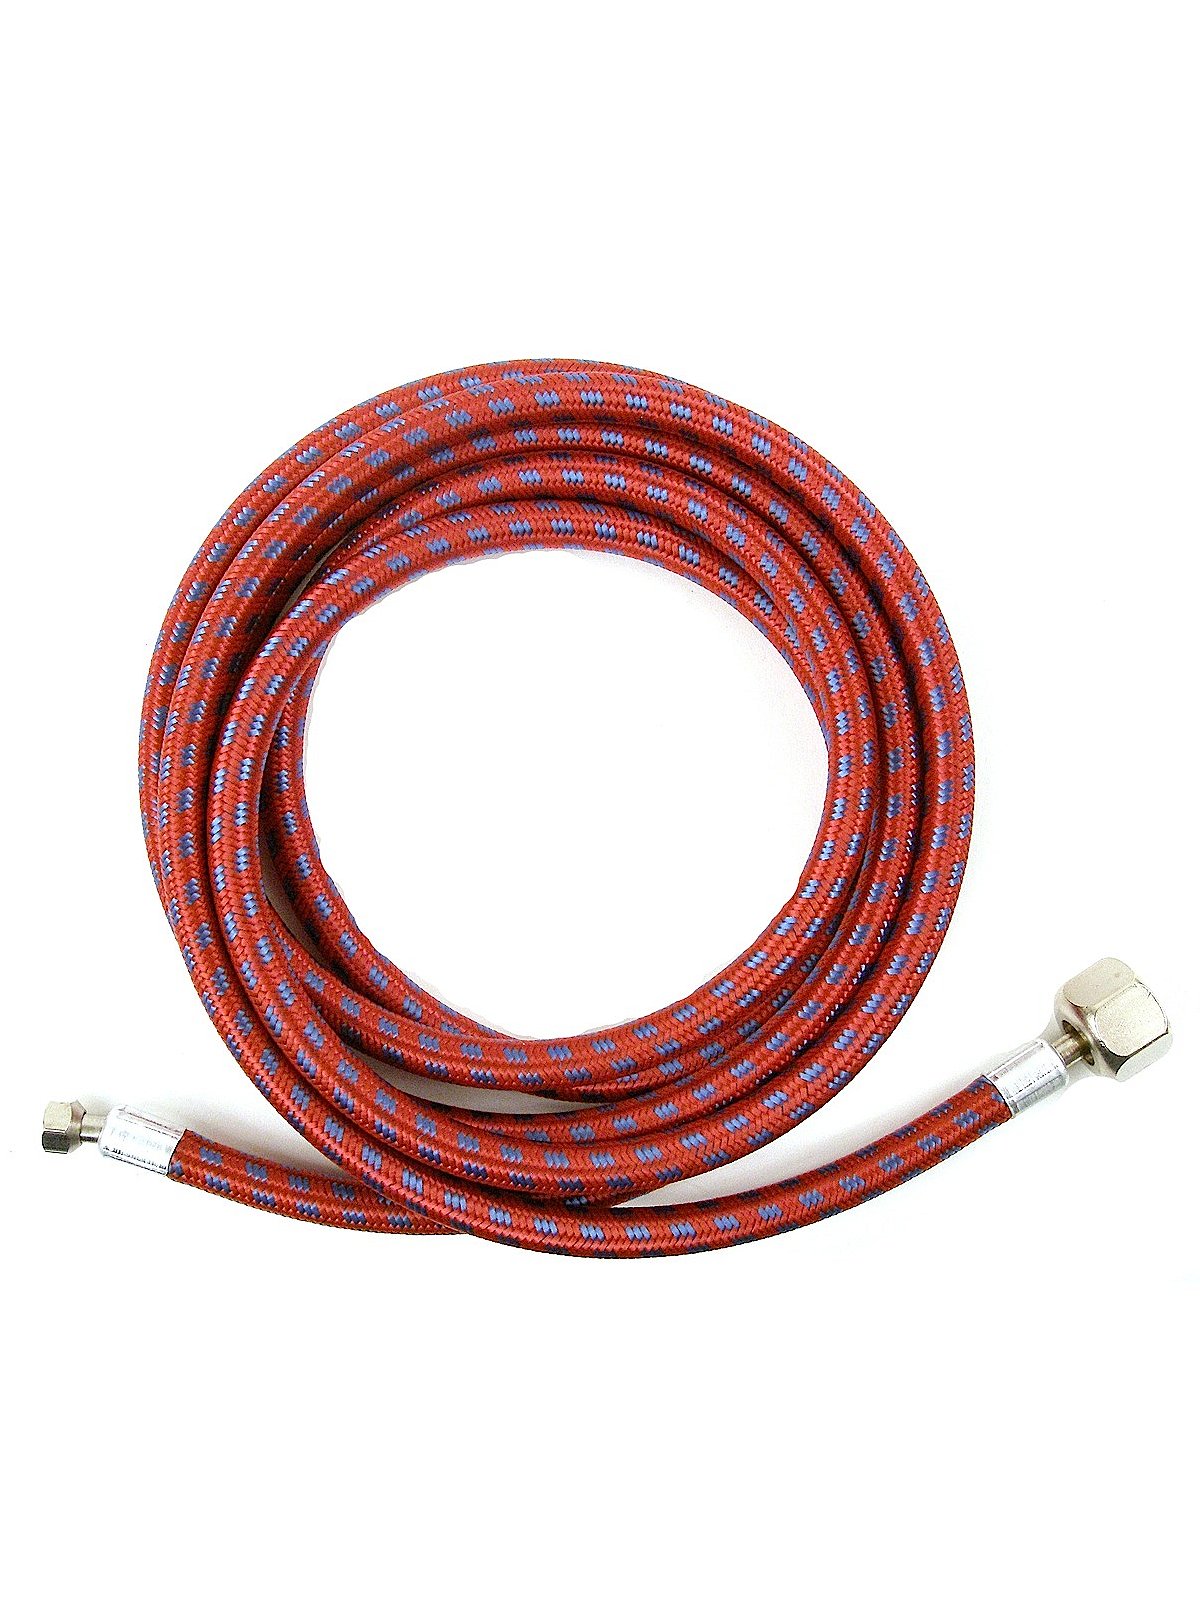 Paasche 10 Ft Braided Air Brush Hose (1/4 & Airbrush) Red And